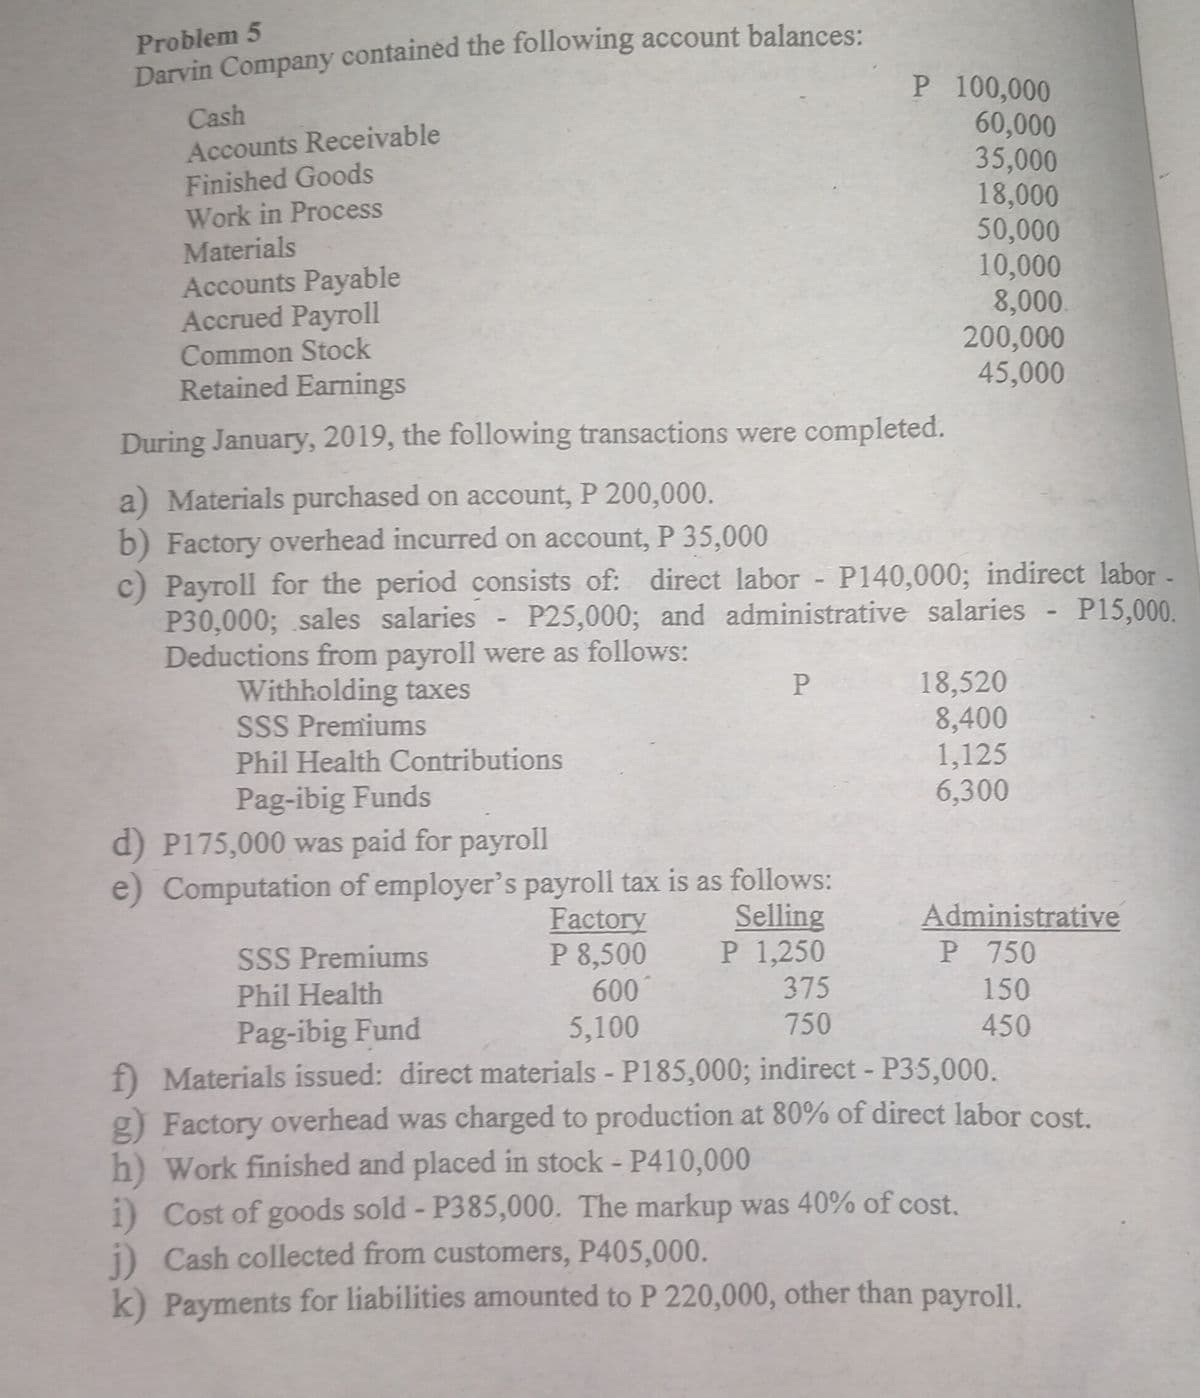 Problem 5
Darvin Company contained the following account balances:
P 100,000
60,000
35,000
18,000
50,000
10,000
8,000.
200,000
45,000
Cash
Accounts Receivable
Finished Goods
Work in Process
Materials
Accounts Payable
Accrued Payroll
Common Stock
Retained Earnings
During January, 2019, the following transactions were completed.
a) Materials purchased on account, P 200,000.
b) Factory overhead incurred on account, P 35,000
c) Payroll for the period consists of: direct labor P140,000; indirect labor -
P30,000; sales salaries -
Deductions from payroll were as follows:
Withholding taxes
SSS Premiums
Phil Health Contributions
P25,000; and administrative salaries
P15,000.
18,520
8,400
1,125
6,300
Pag-ibig Funds
d) P175,000 was paid for payroll
e) Computation of employer's payroll tax is as follows:
Selling
P 1,250
375
750
Factory
P 8,500
600
Administrative
P 750
SSS Premiums
Phil Health
150
Pag-ibig Fund
5,100
450
f) Materials issued: direct materials - P185,000; indirect - P35,000.
g) Factory overhead was charged to production at 80% of direct labor cost.
h) Work finished and placed in stock - P410,000
i) Cost of goods sold - P385,000. The markup was 40% of cost.
i) Cash collected from customers, P405,000.
k) Payments for liabilities amounted to P 220,000, other than payroll.
